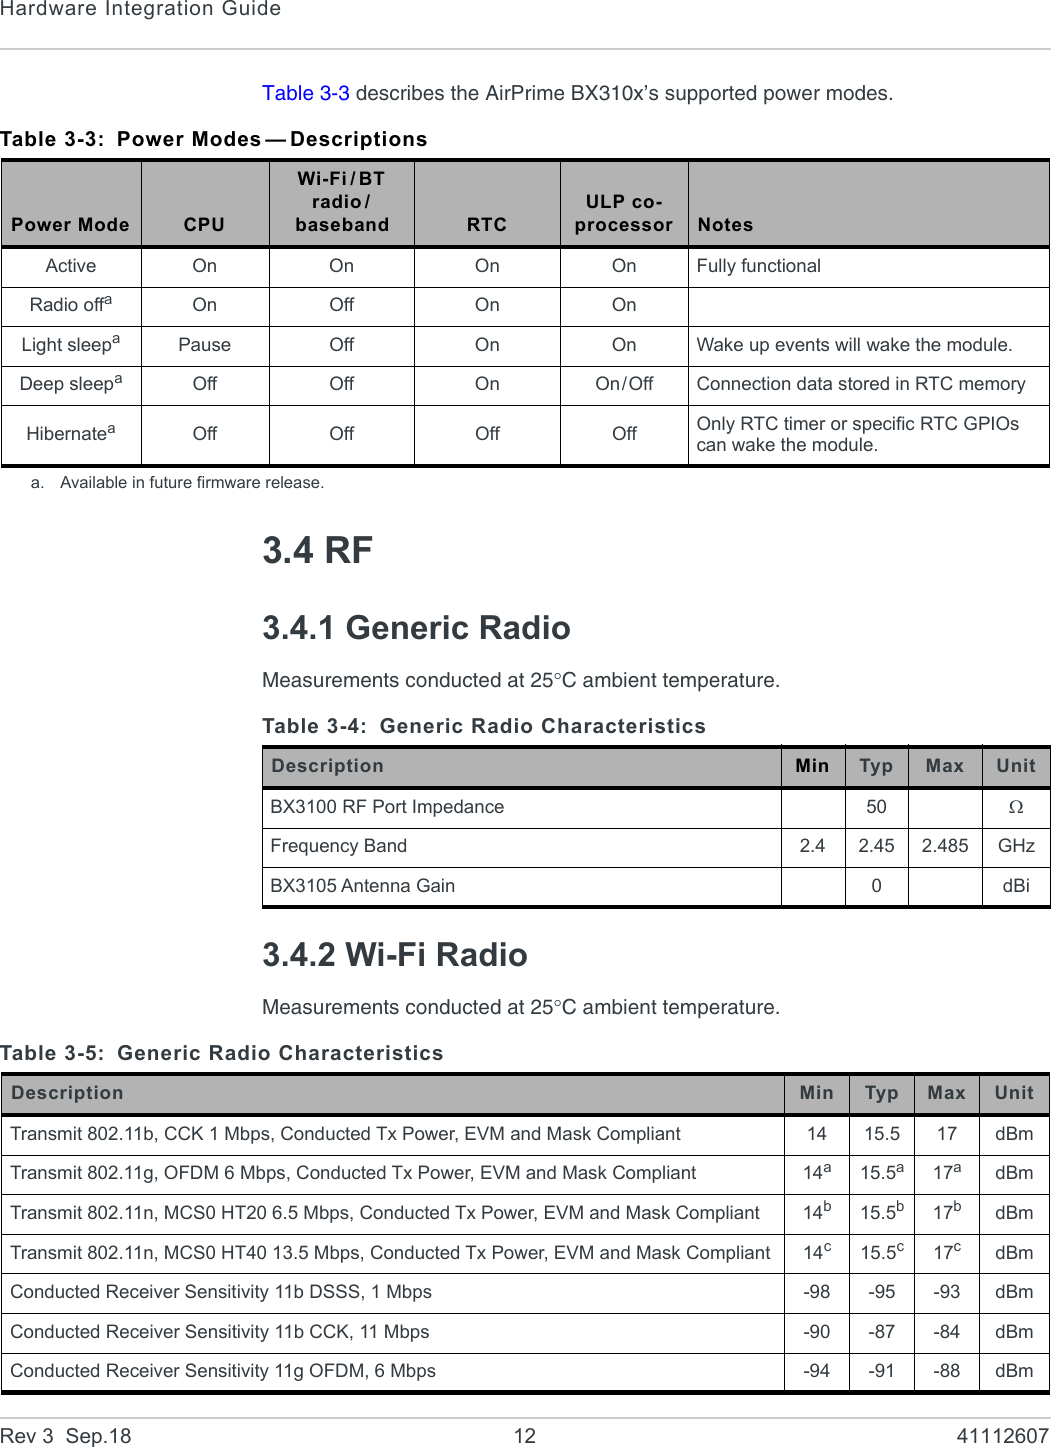 Hardware Integration GuideRev 3  Sep.18 12 41112607Table 3-3 describes the AirPrime BX310x’s supported power modes.3.4 RF3.4.1 Generic RadioMeasurements conducted at 25C ambient temperature.3.4.2 Wi-Fi RadioMeasurements conducted at 25C ambient temperature.Table 3-3: Power Modes — DescriptionsPower Mode CPUWi-Fi/BT radio /baseband RTCULP co-processor NotesActive On On On On Fully functionalRadio offaOn Off On OnLight sleepaPause Off On On Wake up events will wake the module.Deep sleepaOff Off On On/Off Connection data stored in RTC memoryHibernateaOff Off Off Off Only RTC timer or specific RTC GPIOs can wake the module.a. Available in future firmware release.Table 3-4: Generic Radio CharacteristicsDescription Min Typ Max UnitBX3100 RF Port Impedance 50 Frequency Band 2.4 2.45 2.485 GHzBX3105 Antenna Gain 0dBiTable 3-5: Generic Radio CharacteristicsDescription Min Typ Max UnitTransmit 802.11b, CCK 1 Mbps, Conducted Tx Power, EVM and Mask Compliant 14 15.5 17 dBmTransmit 802.11g, OFDM 6 Mbps, Conducted Tx Power, EVM and Mask Compliant 14a15.5a17adBmTransmit 802.11n, MCS0 HT20 6.5 Mbps, Conducted Tx Power, EVM and Mask Compliant 14b15.5b17bdBmTransmit 802.11n, MCS0 HT40 13.5 Mbps, Conducted Tx Power, EVM and Mask Compliant 14c15.5c17cdBmConducted Receiver Sensitivity 11b DSSS, 1 Mbps -98 -95 -93 dBmConducted Receiver Sensitivity 11b CCK, 11 Mbps -90 -87 -84 dBmConducted Receiver Sensitivity 11g OFDM, 6 Mbps -94 -91 -88 dBm